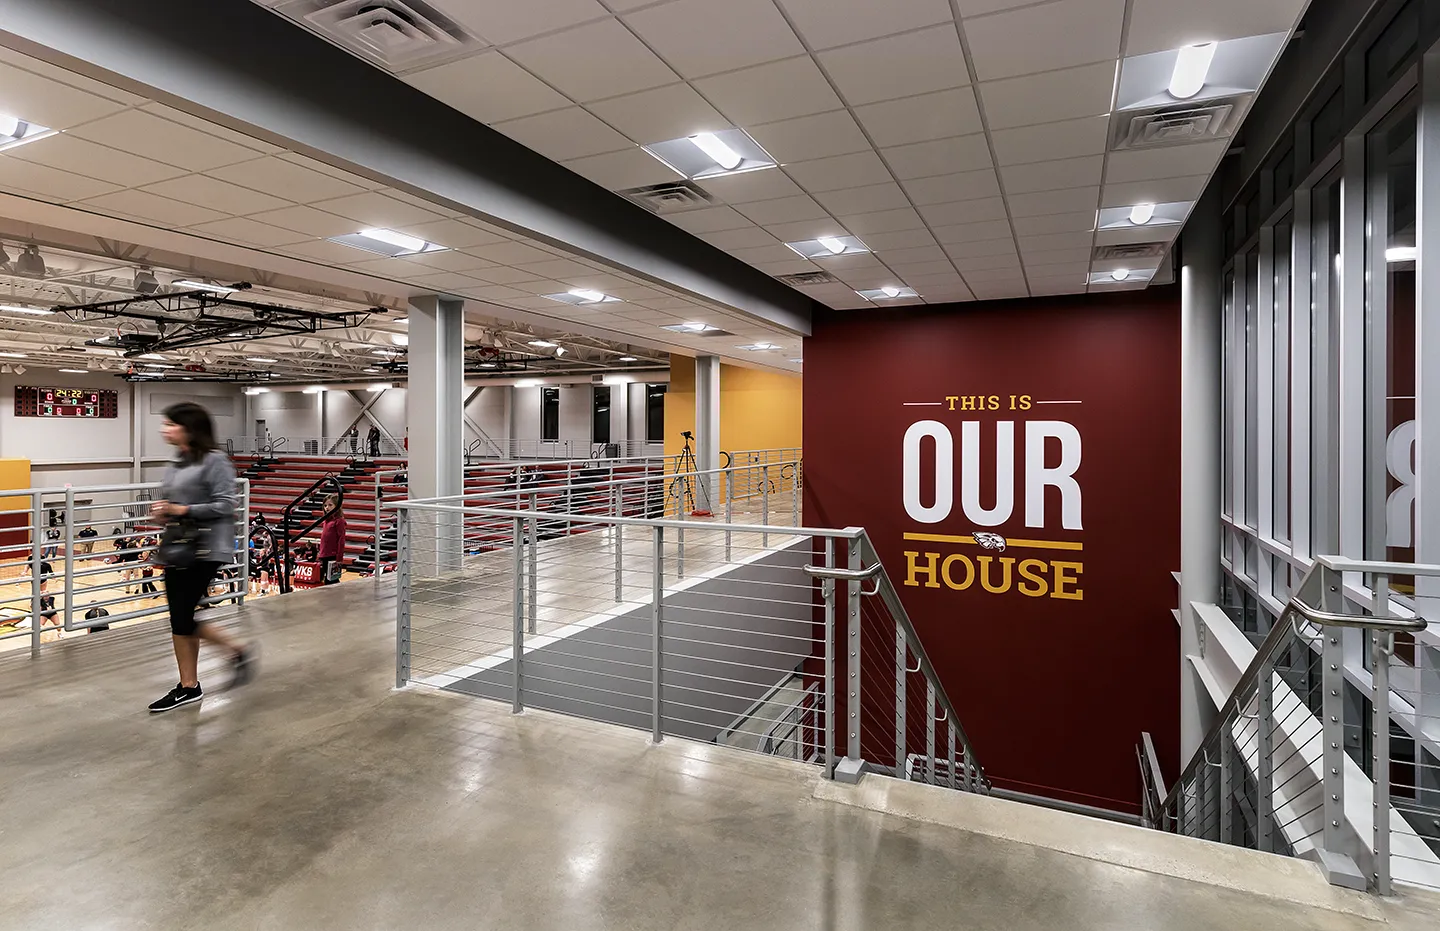 Seats in the Kohawk Arena are accessed from an upper level concourse which hosts concessions, restrooms, and seating areas.